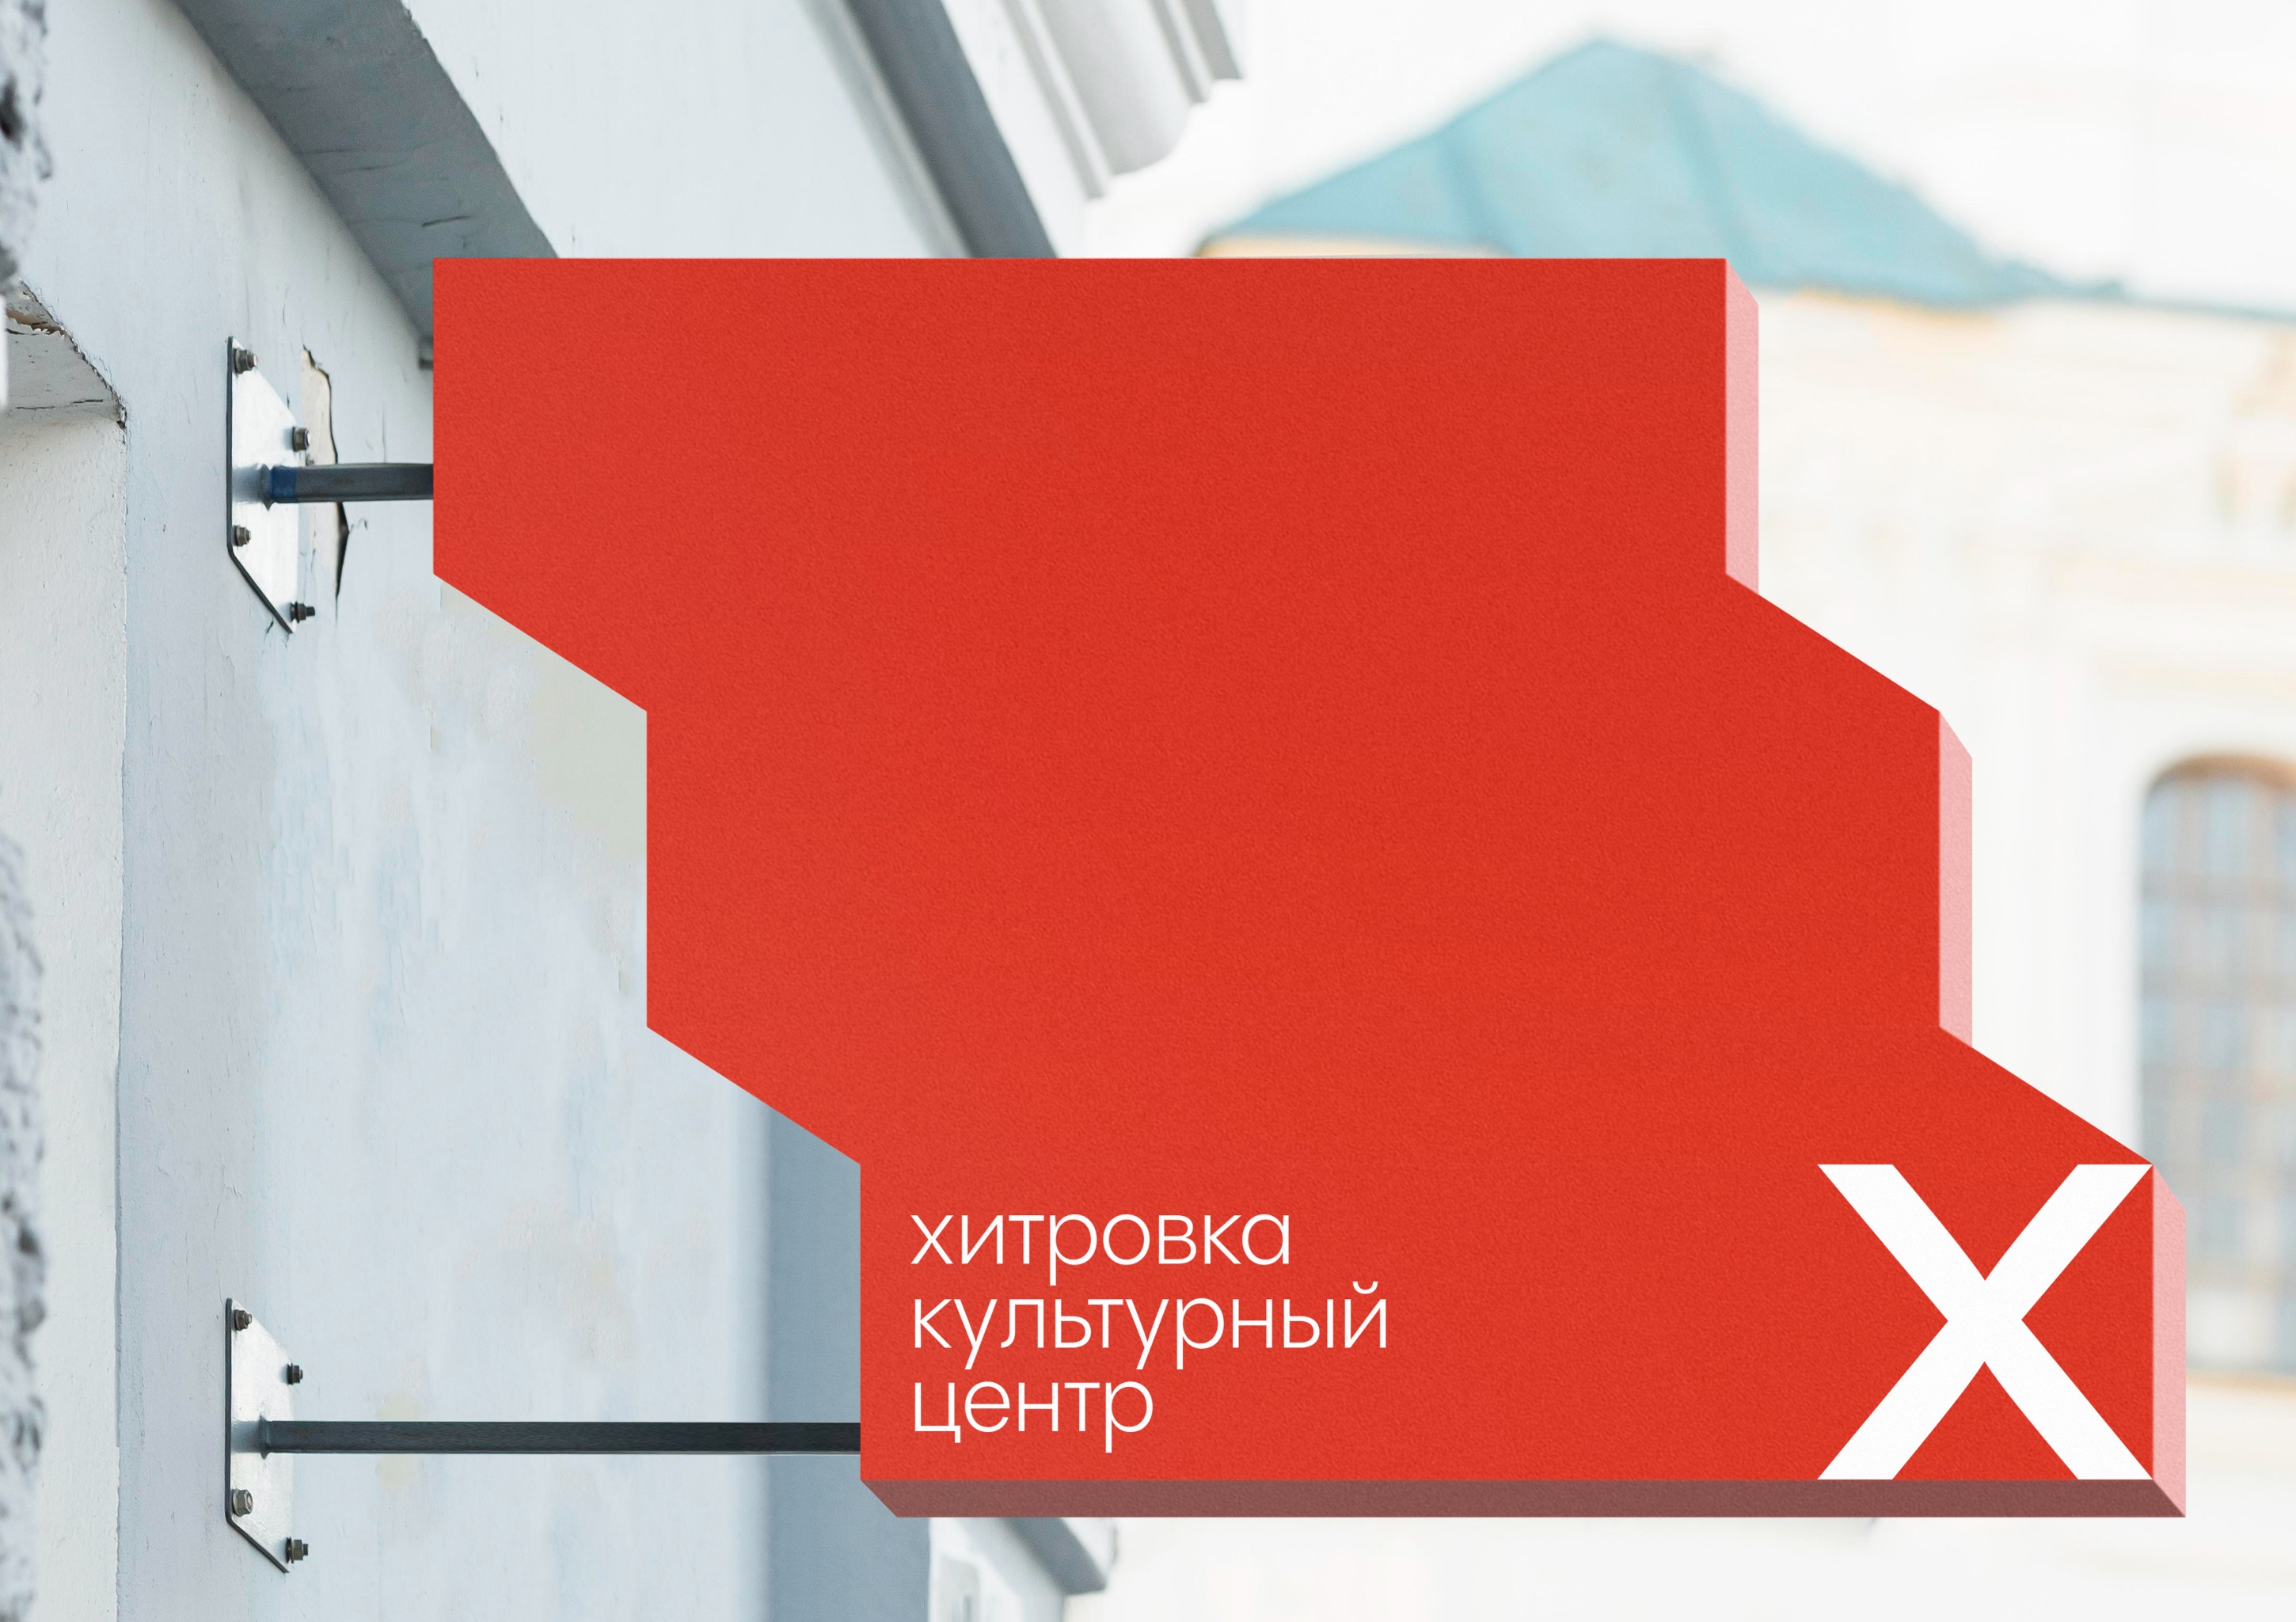 Student Concept for the Rebranding of the Cultural Center Khitrovka